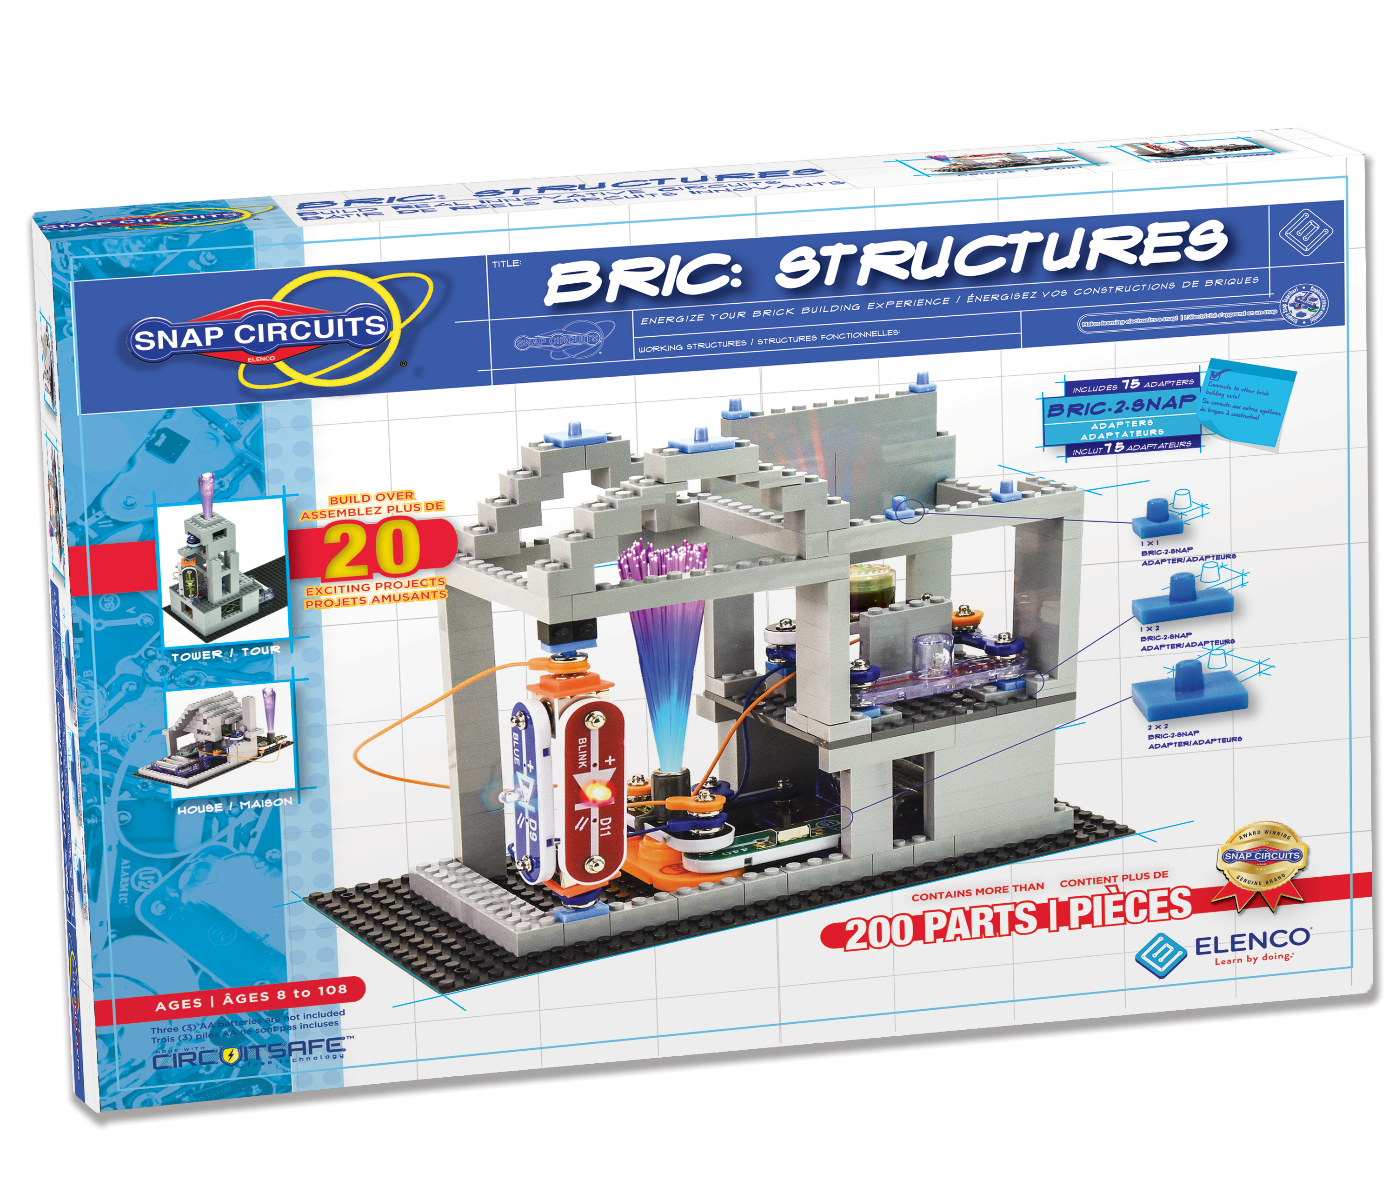 Snap Circuits - Bric: Structures    